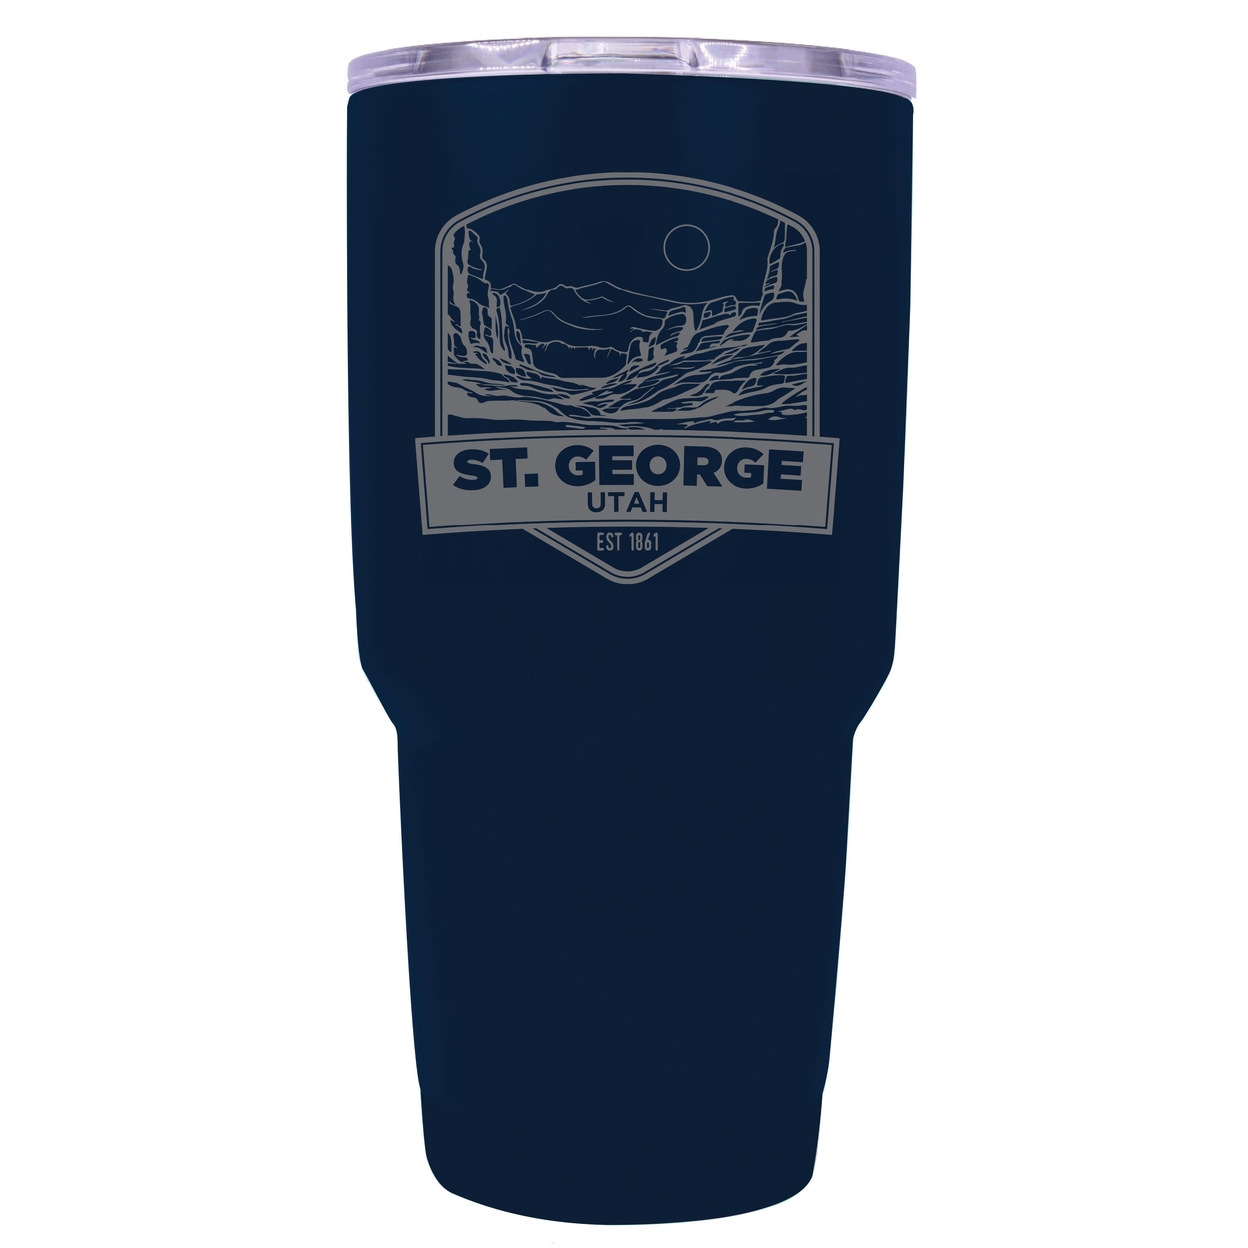 St. George Utah Souvenir 24 Oz Engraved Insulated Stainless Steel Tumbler - Navy,,4-Pack